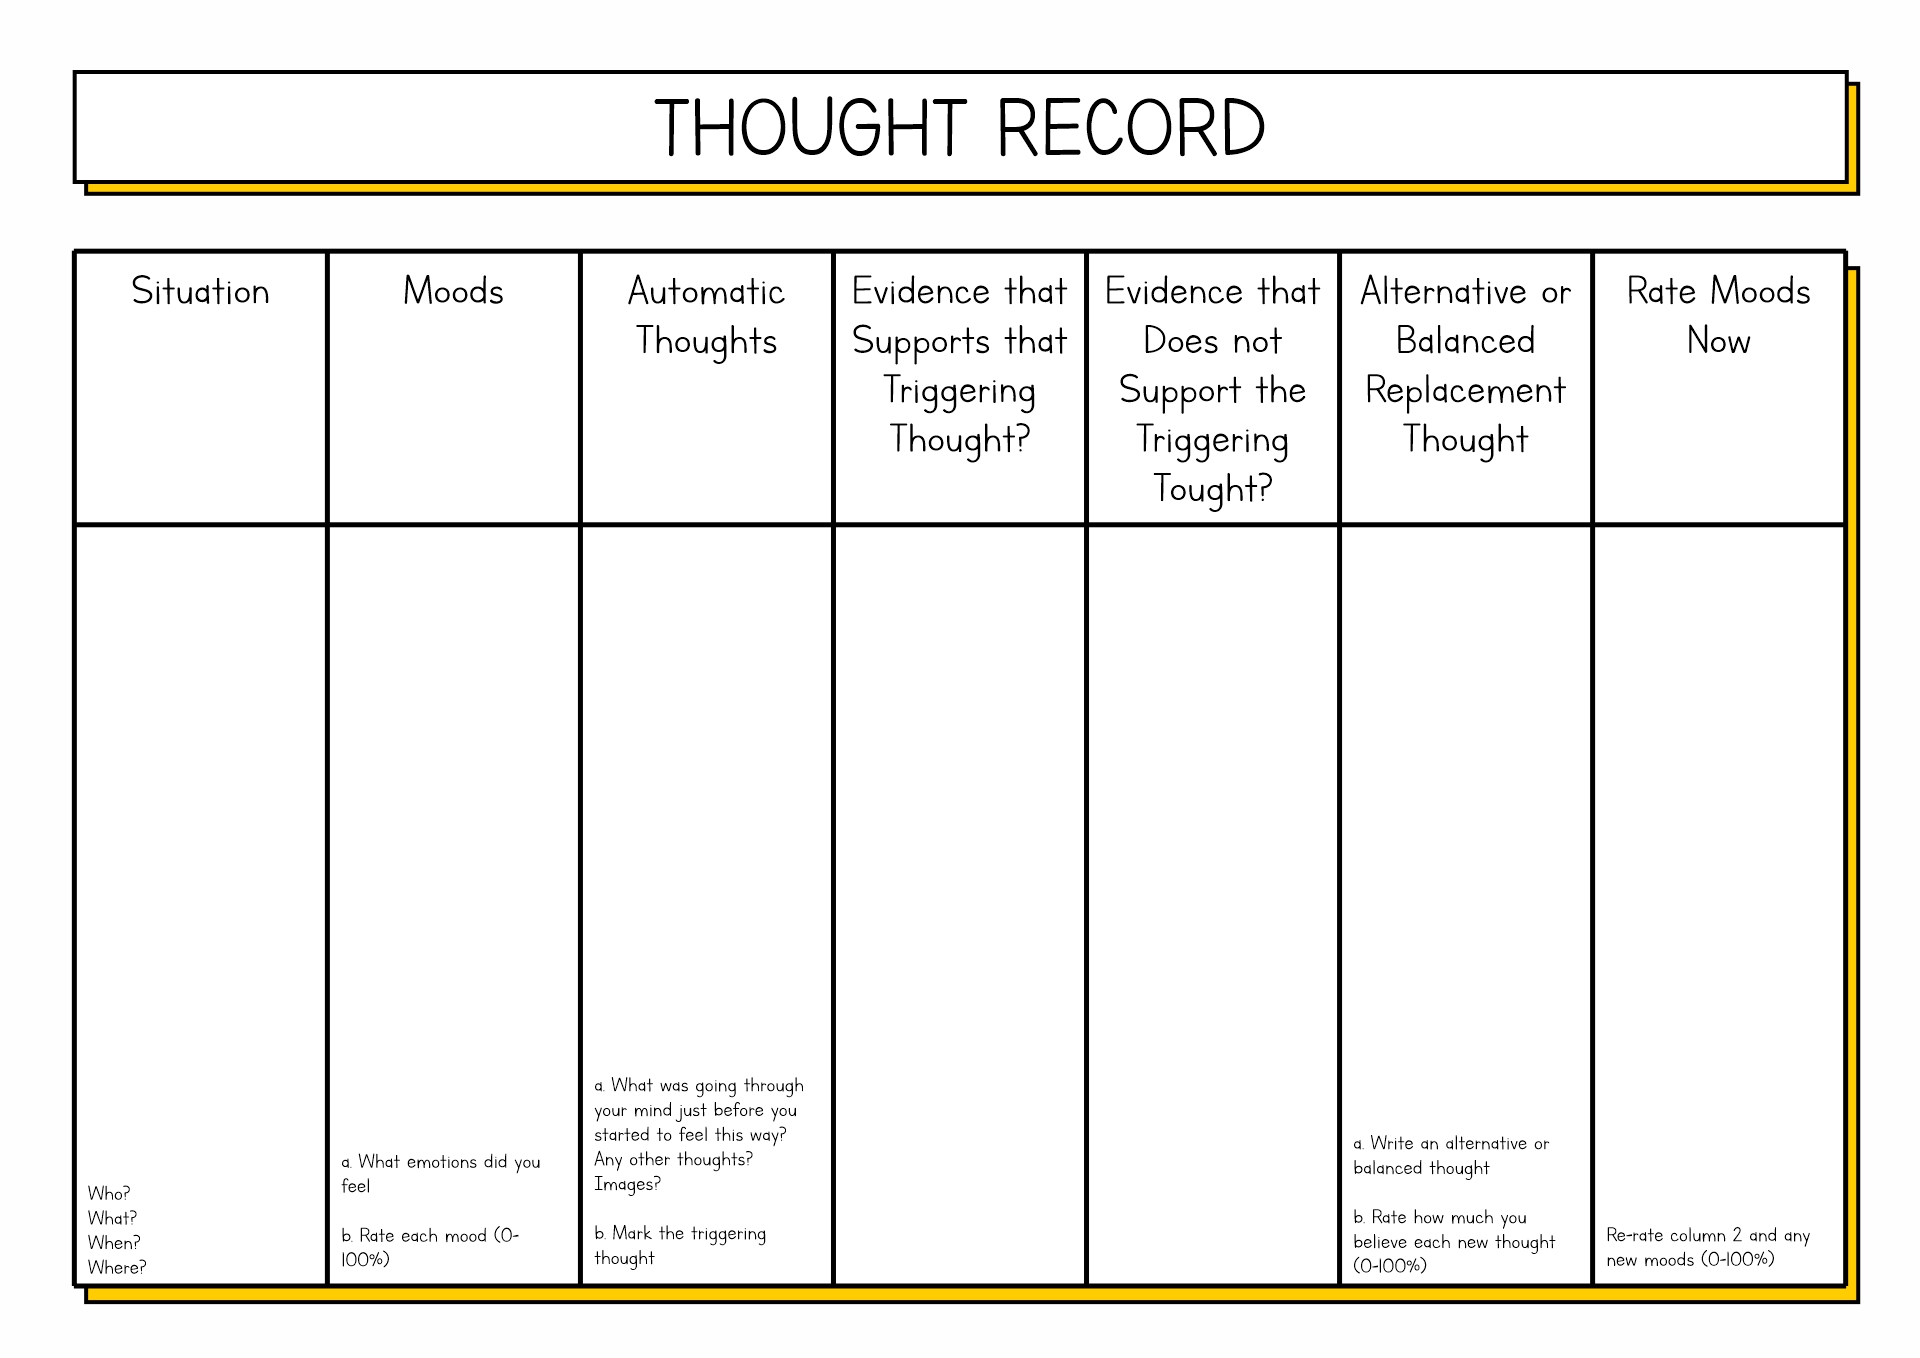 CBT Thought Record Chart Image